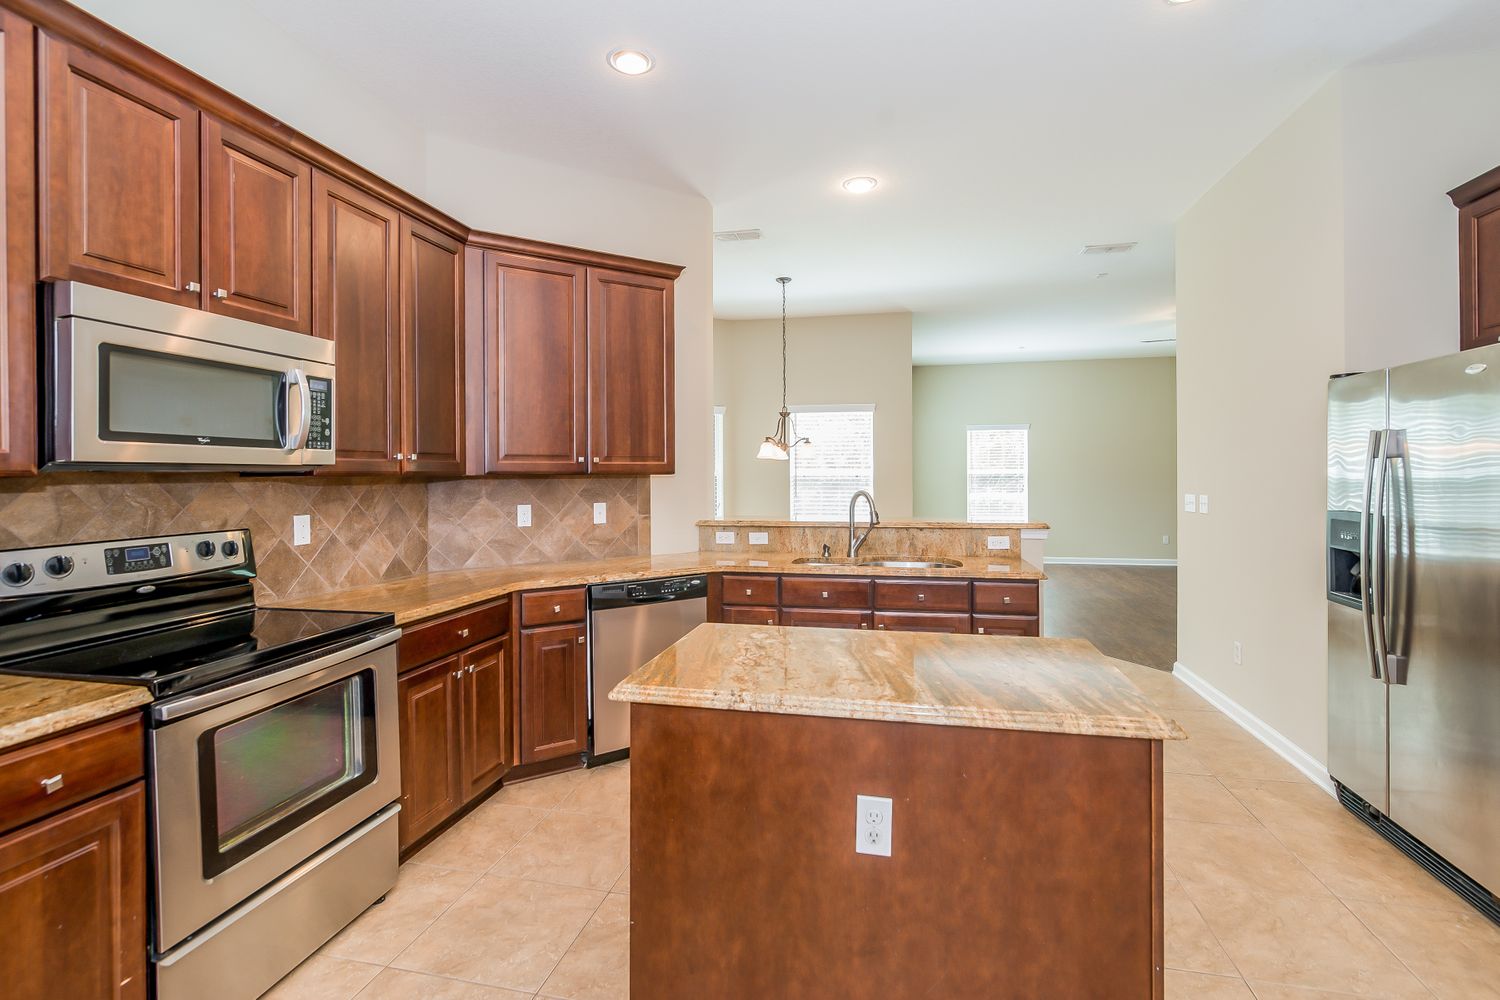 Stunning kitchen with island and stainless steel appliances at Invitation Homes Jacksonville.